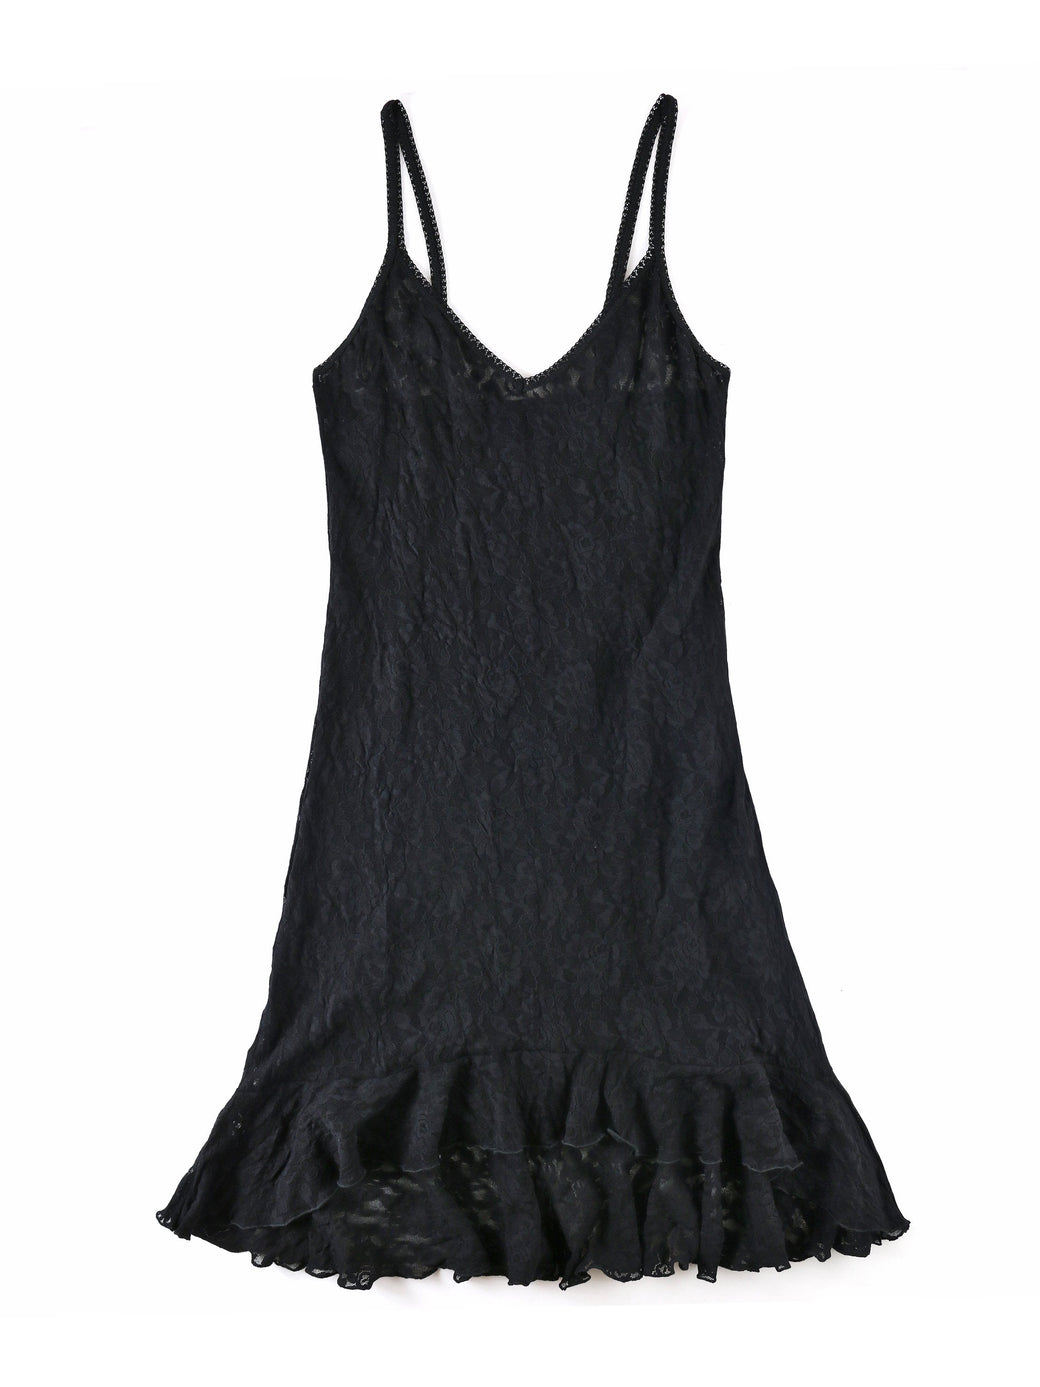 Signature Lace High-Low Chemise